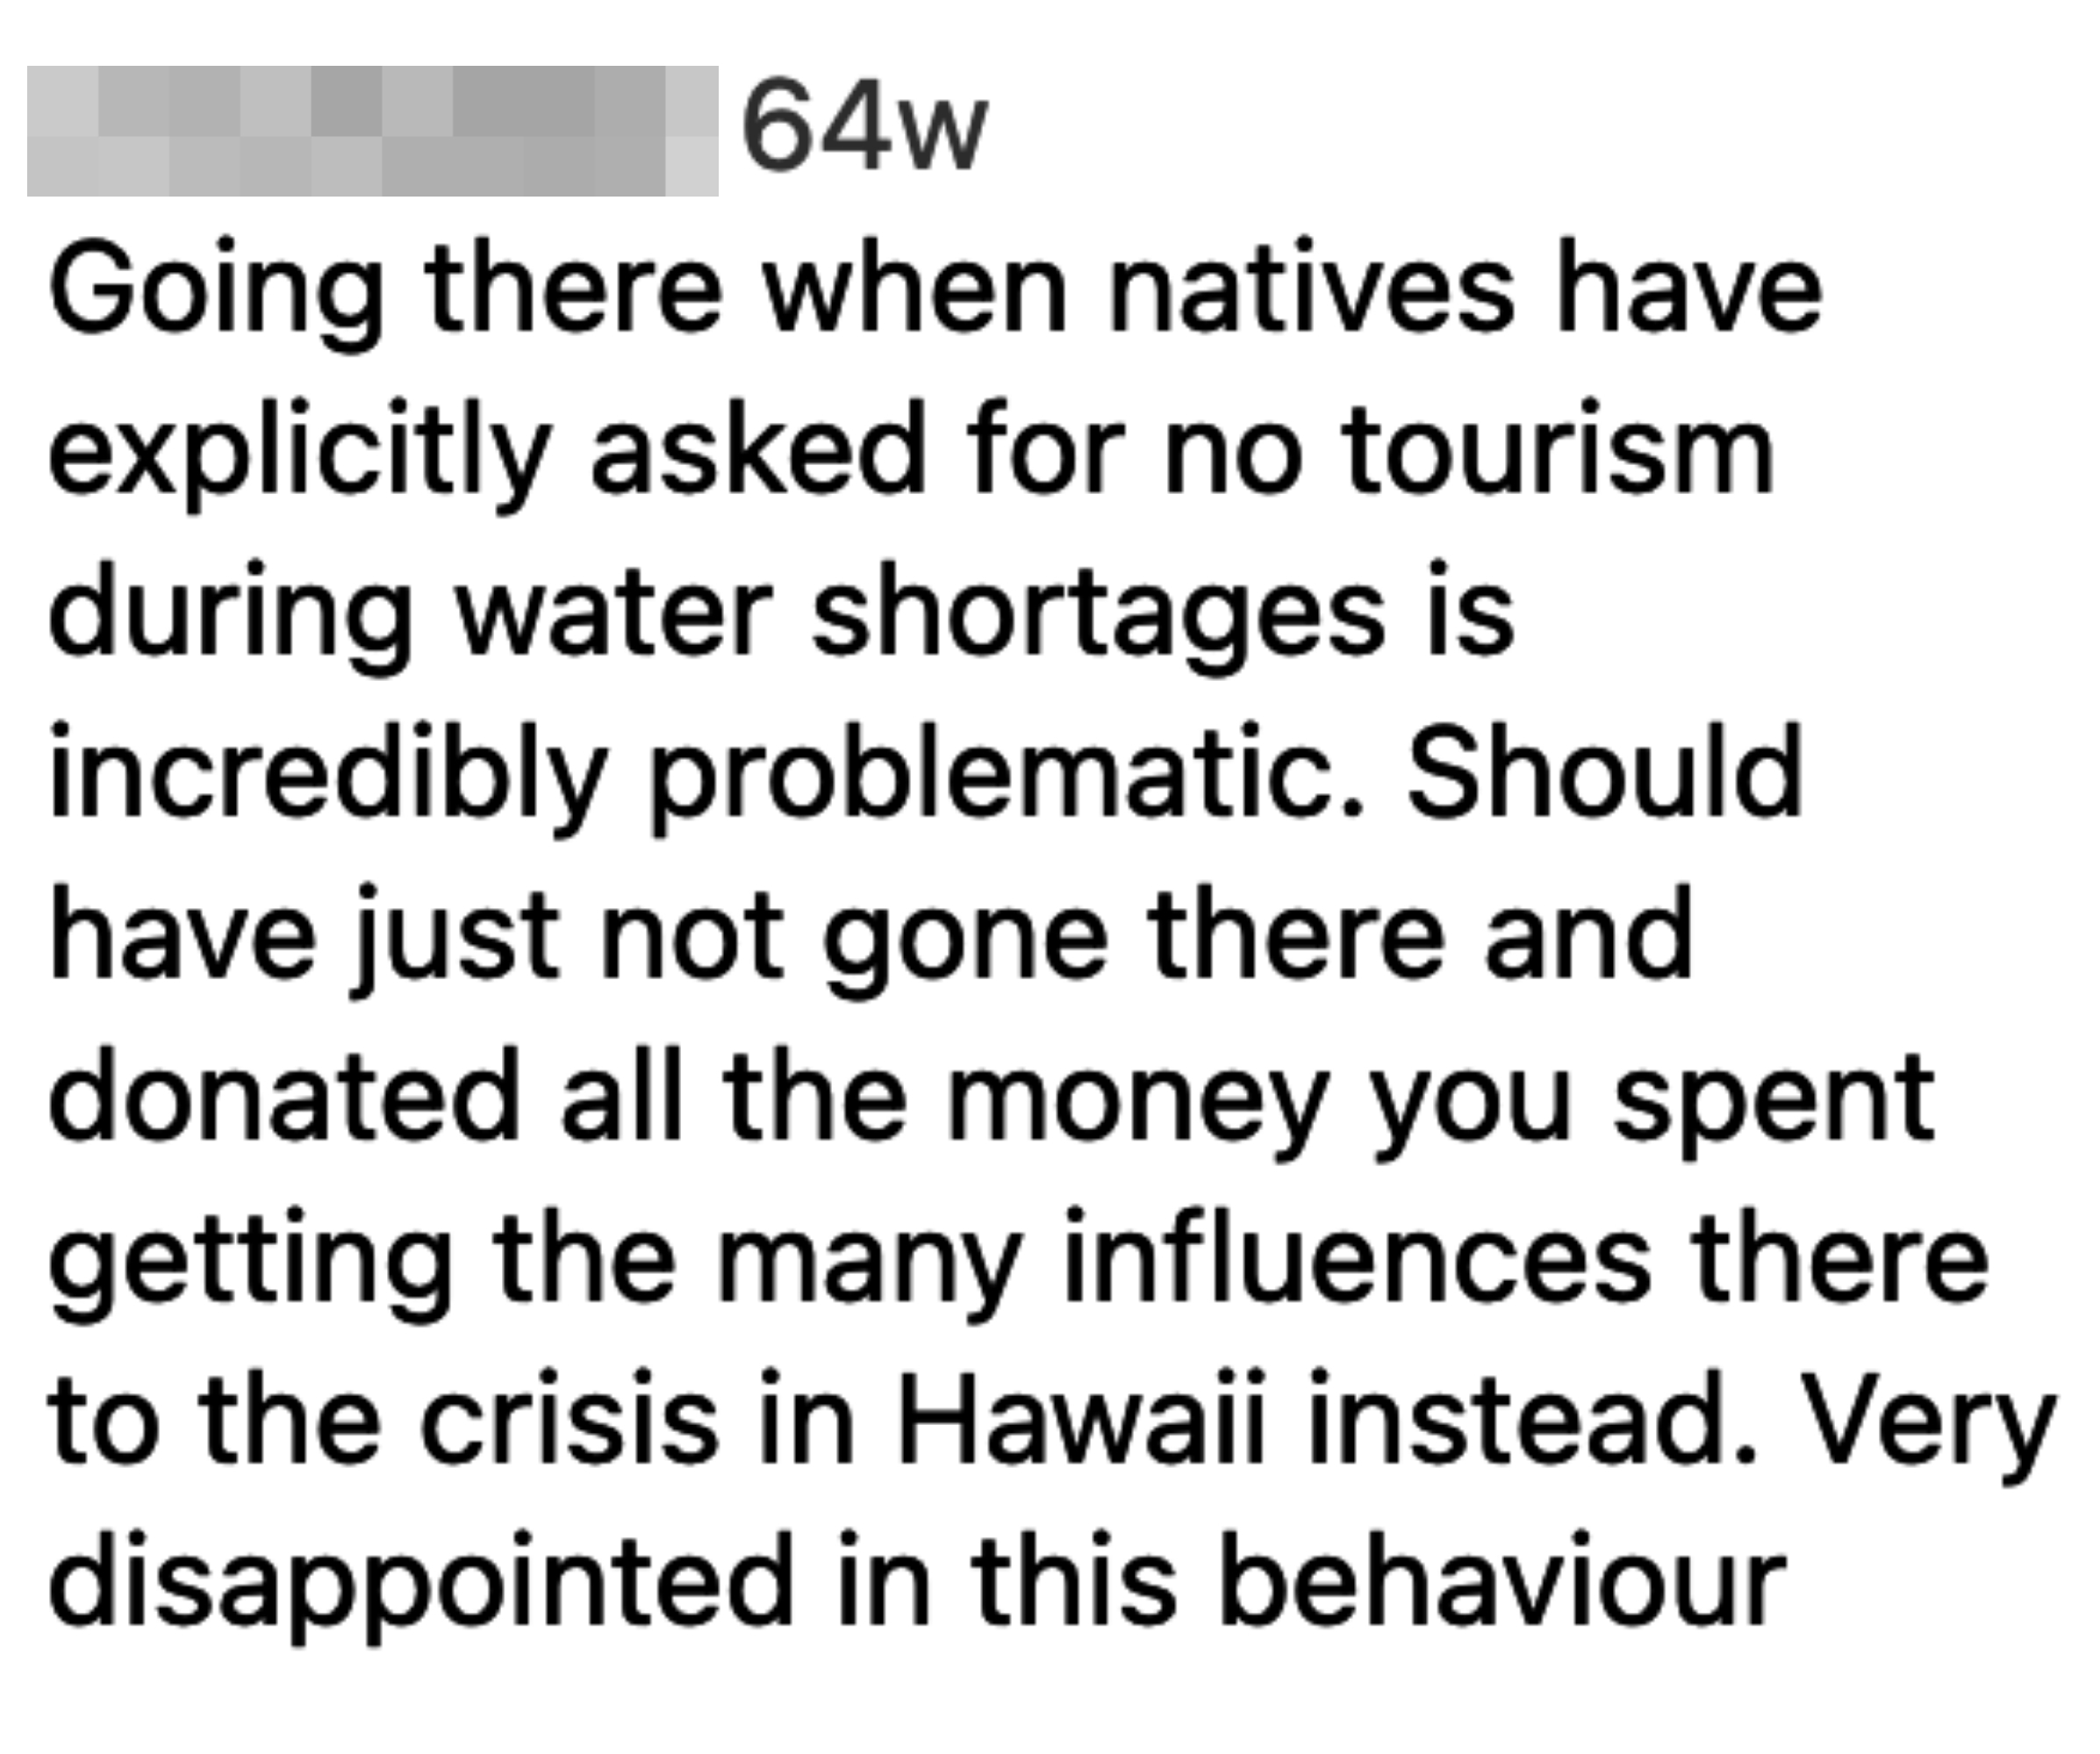 &quot;Going there when natives have explicit asked for no tourism during water shortages is incredibly problematic; should have just not gone there and donated all the money you spent getting the many influences there to the crisis in Hawaii instead&quot;